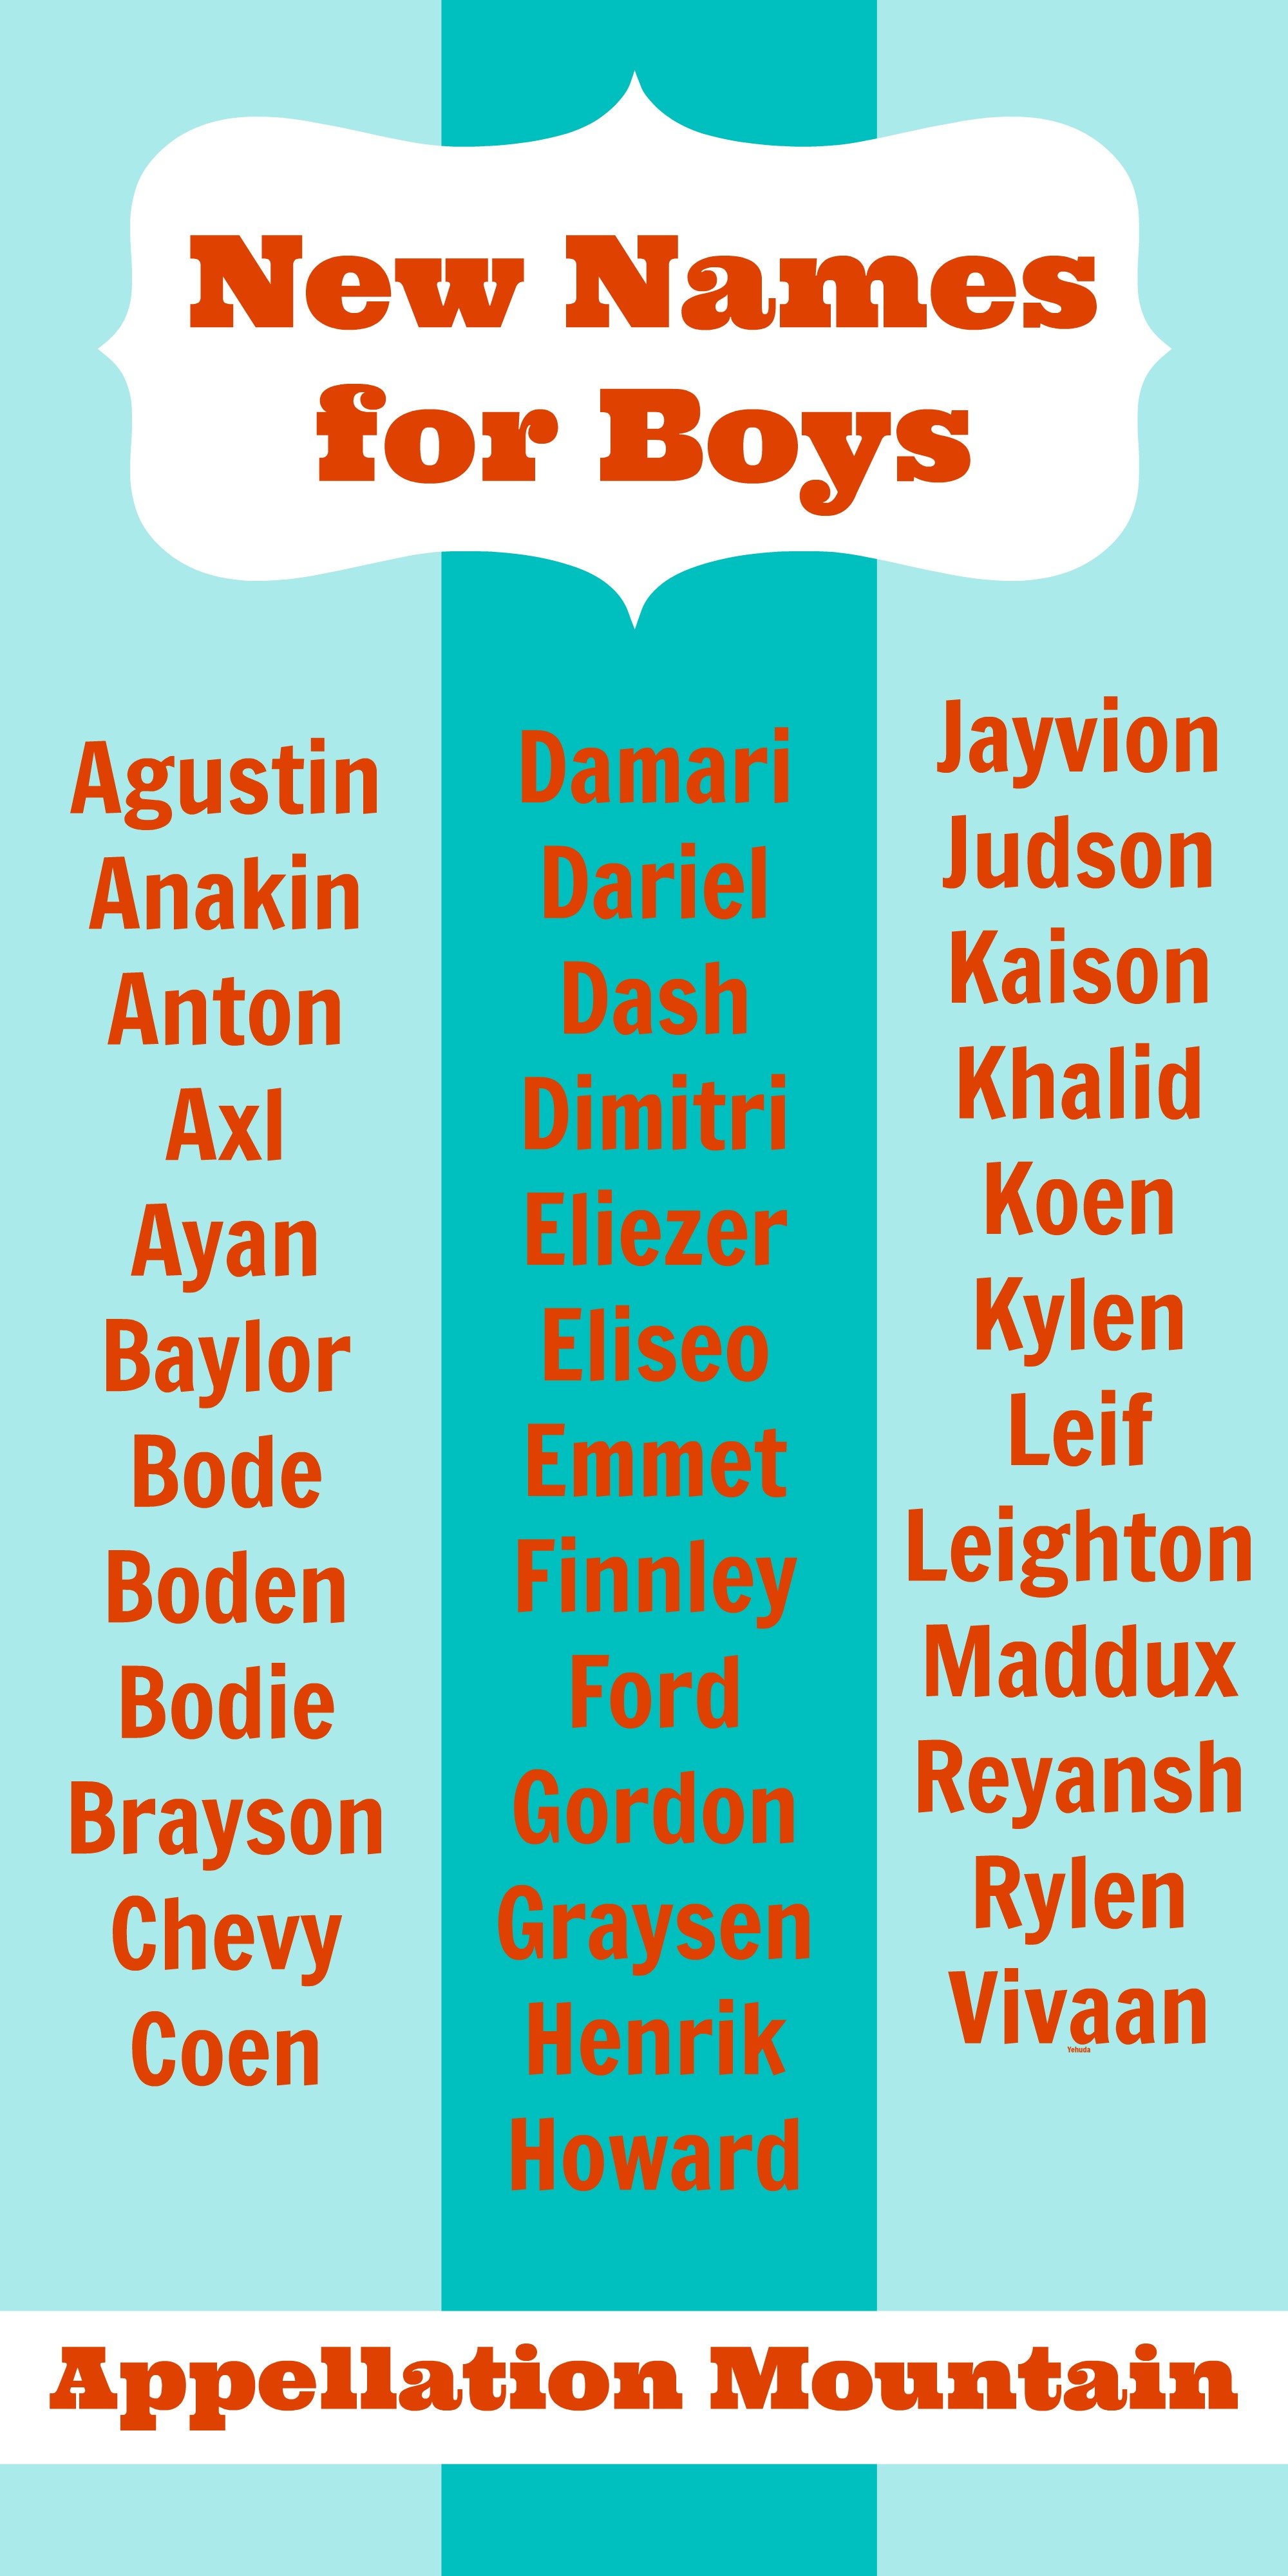 New Names for Boys 2014